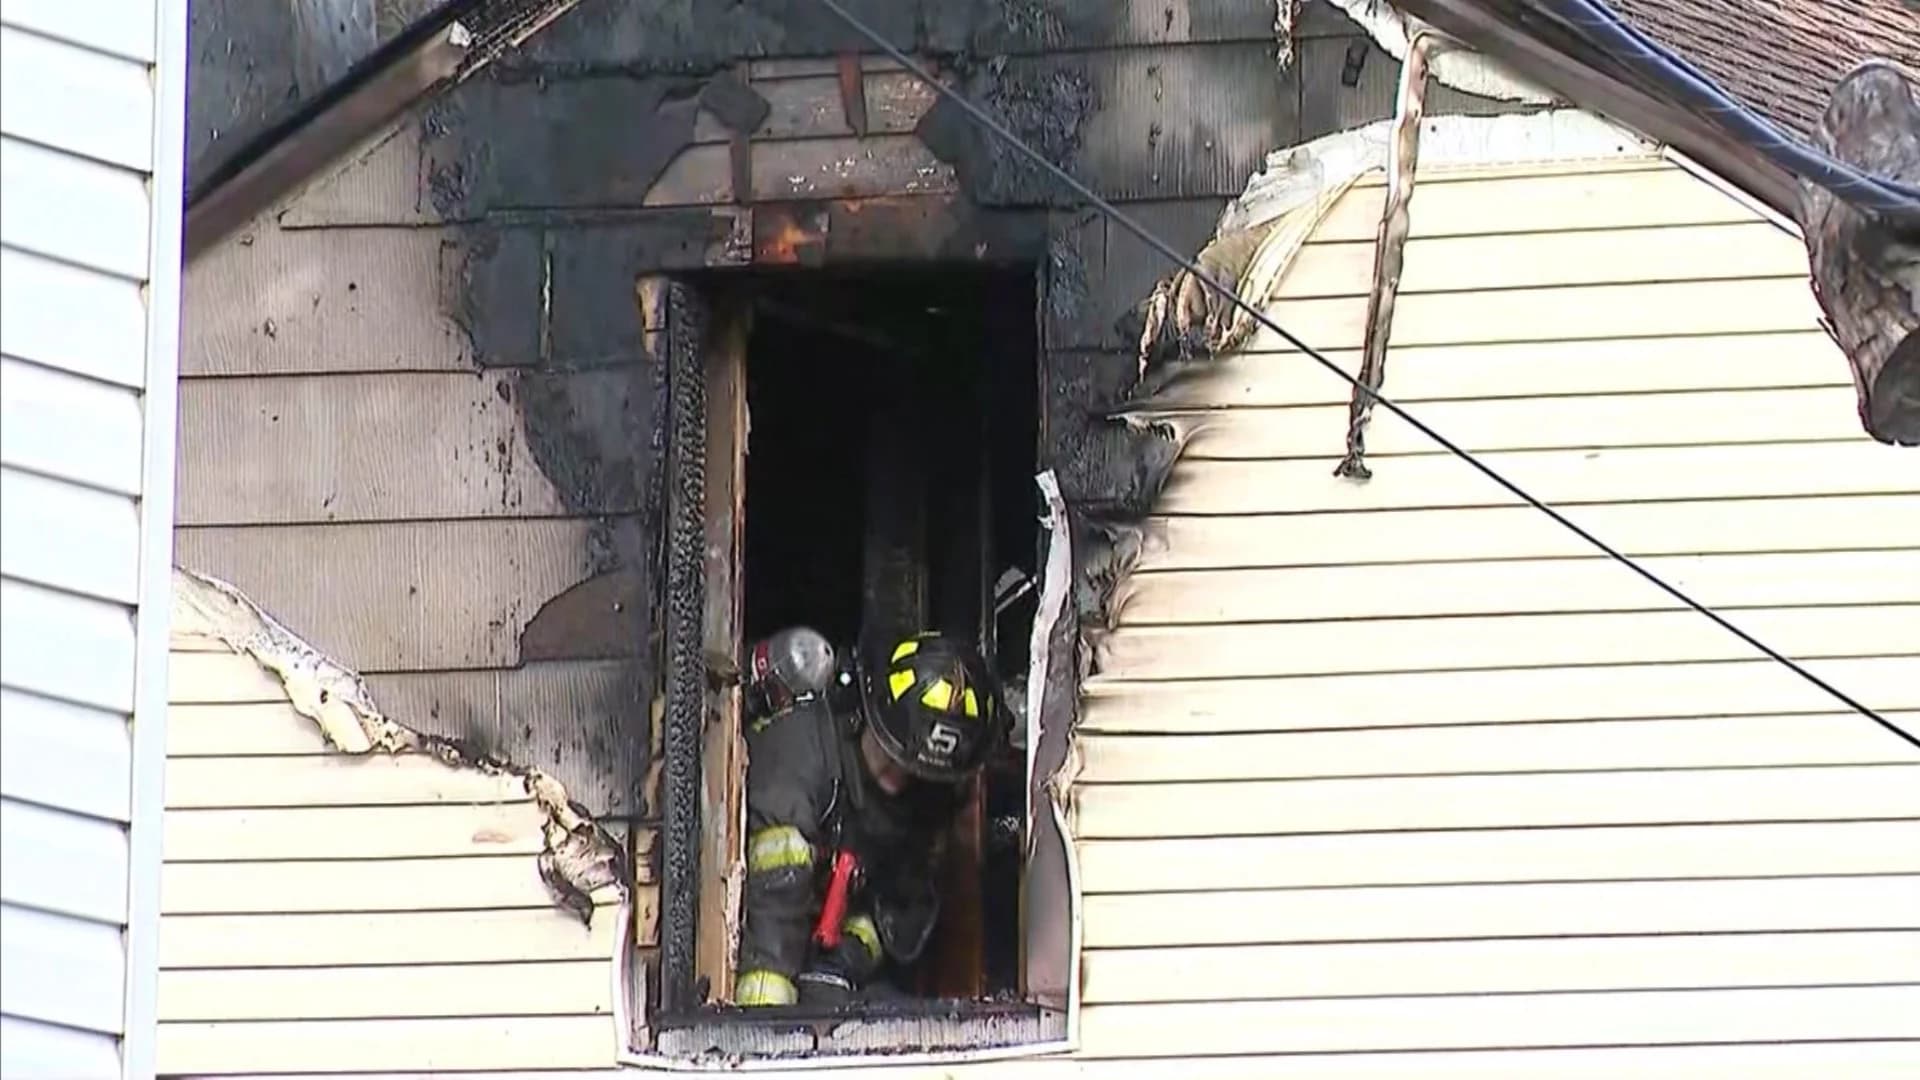 Authorities: Man killed leaping from burning building; went back inside to help others